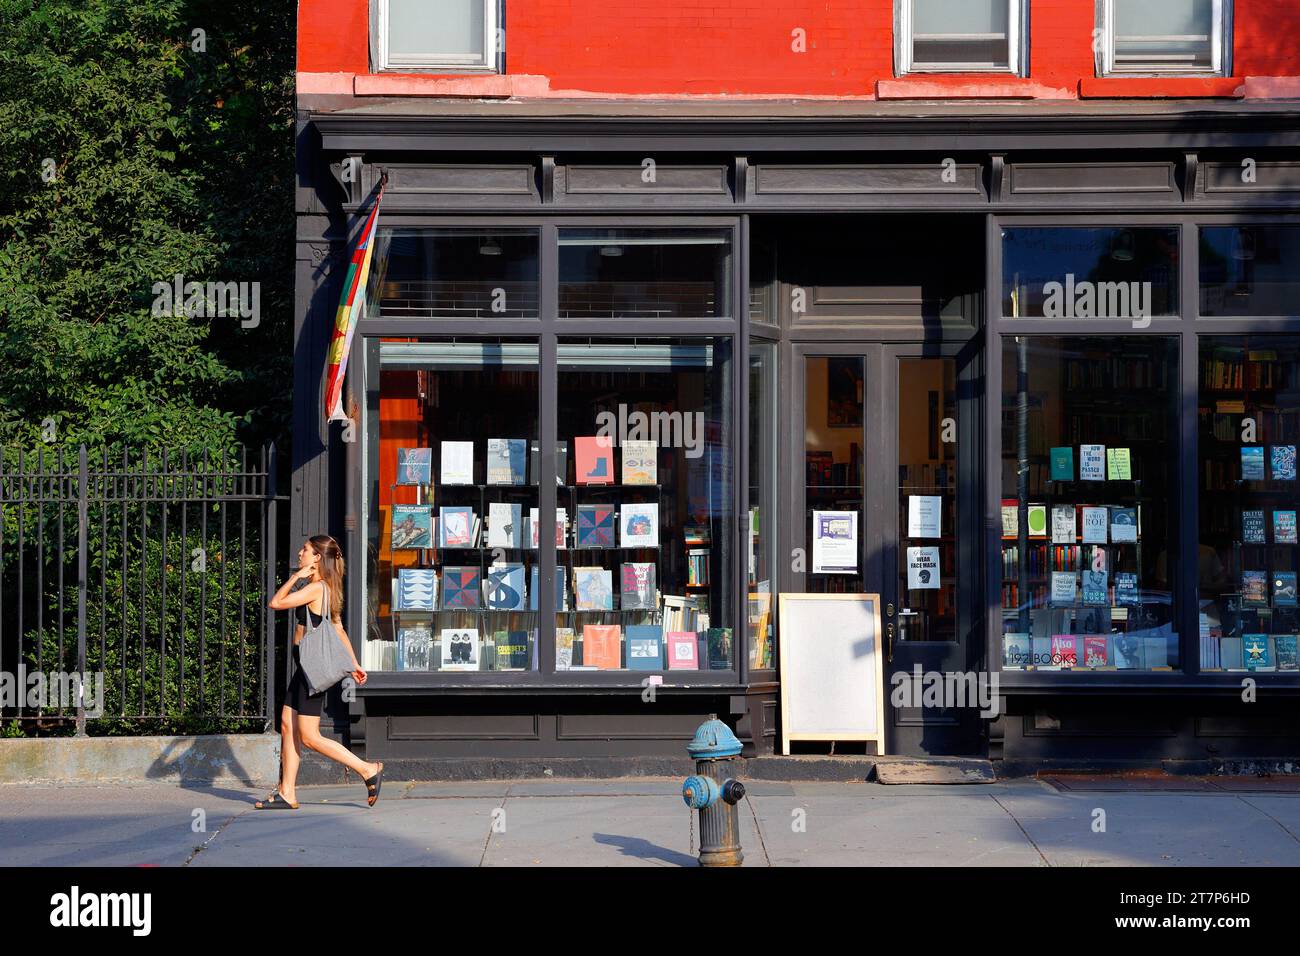 192 Books, 192 10th Ave, New York, NYC storefront of a bookstore in Manhattan's Chelsea neighborhood. Stock Photo